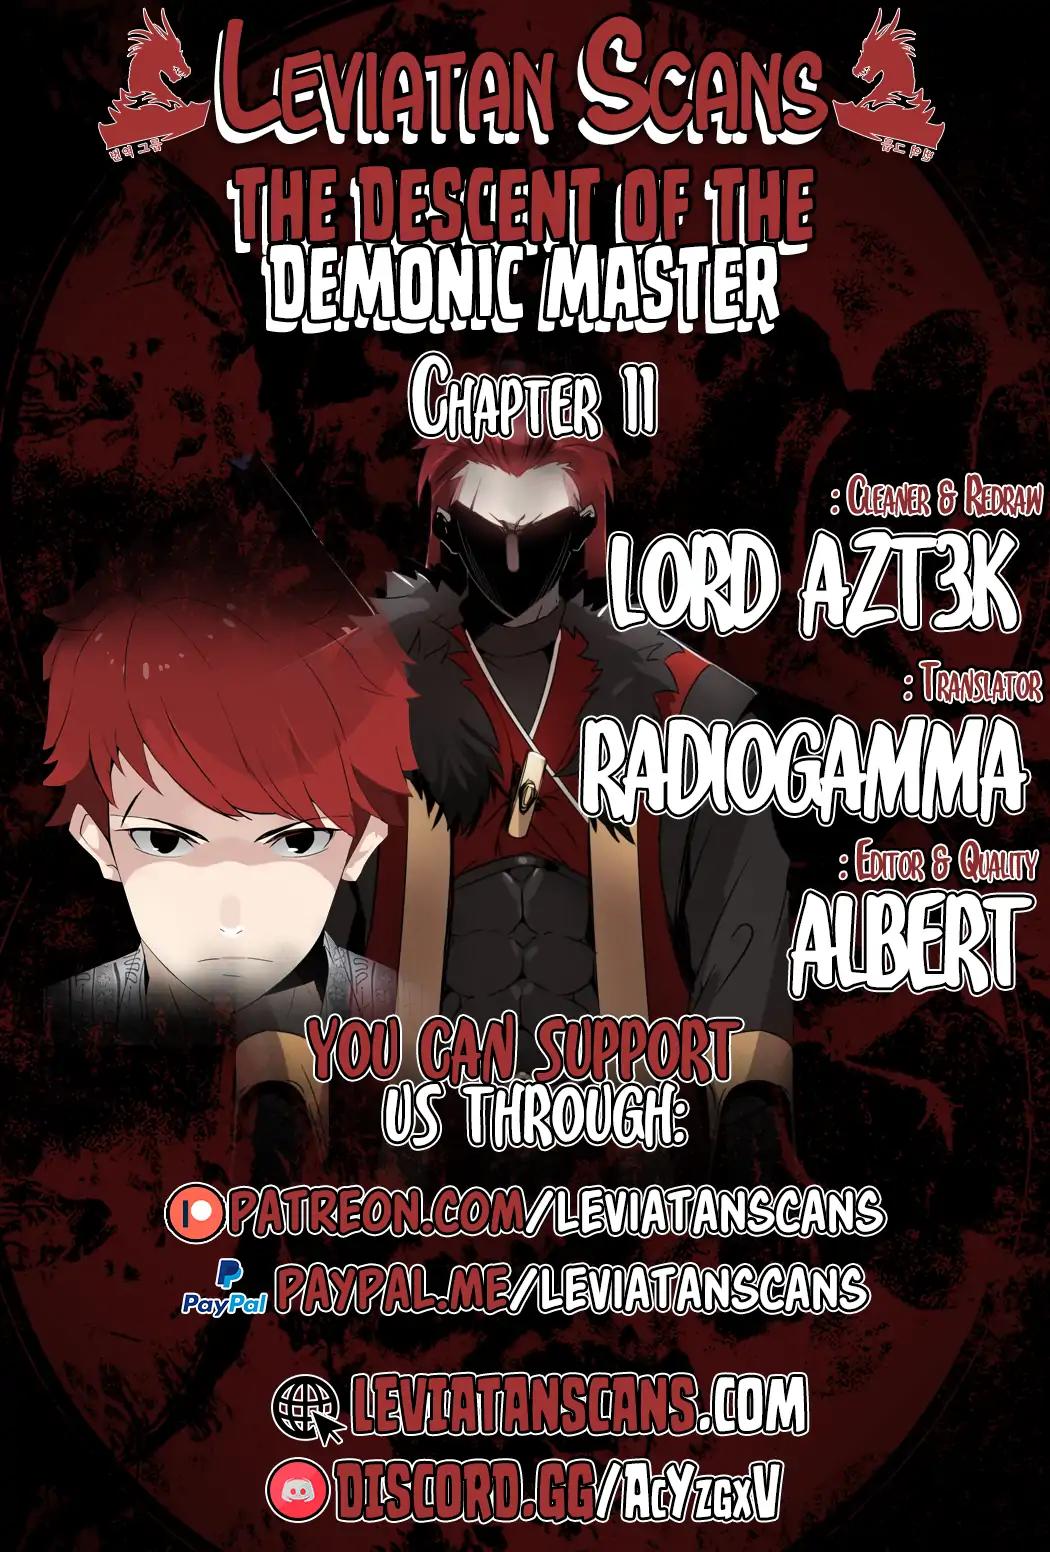 The Descent of the Demonic Master Chapter 11